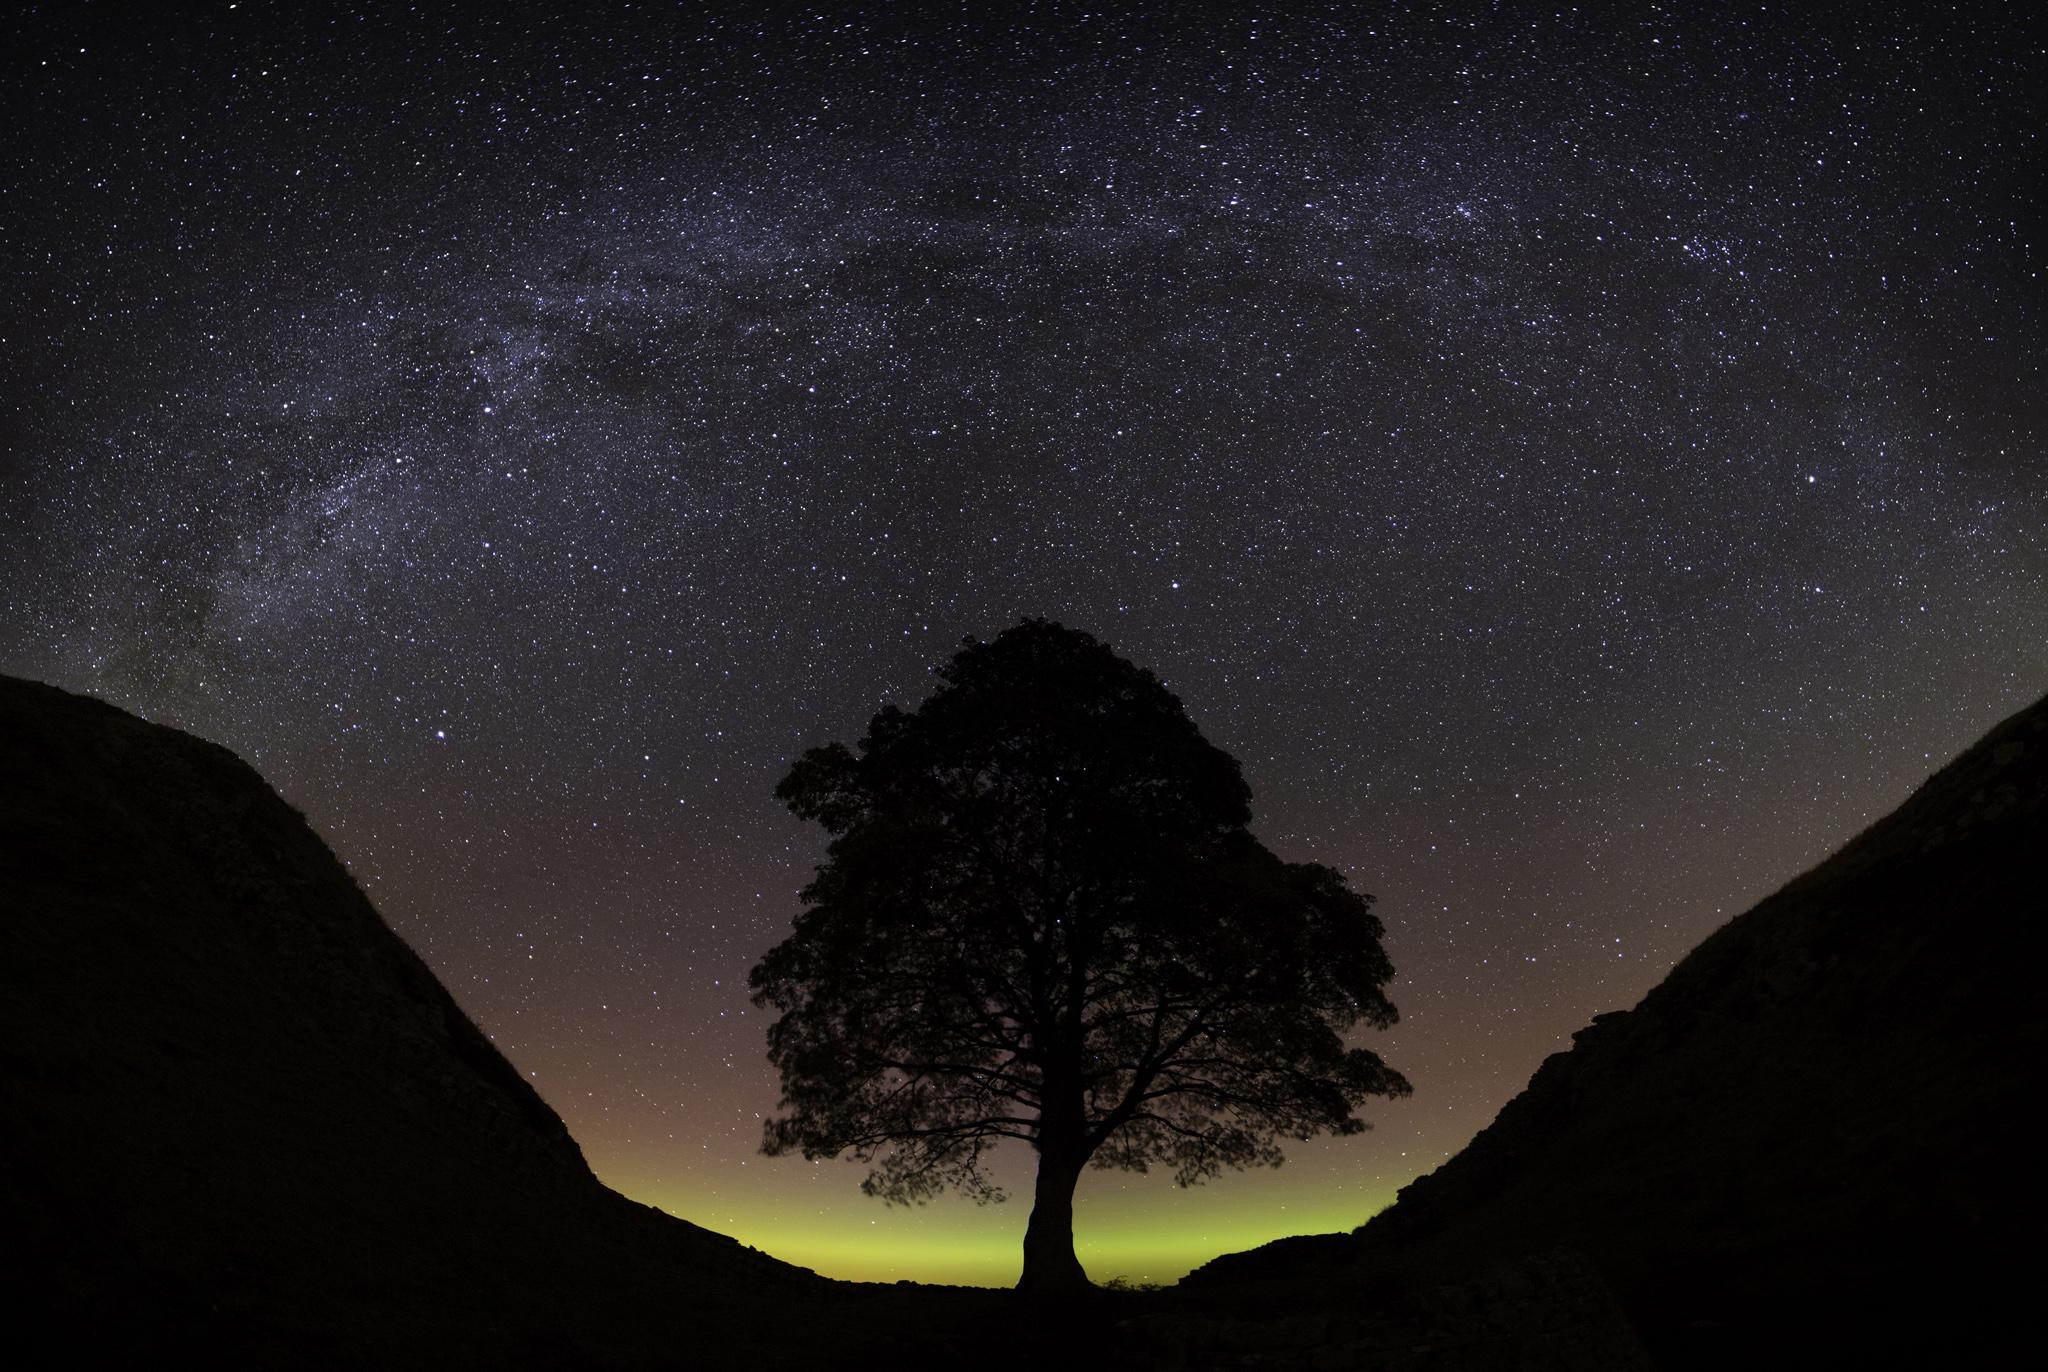 The Milky Way over Sycamore Gap in Northumberland